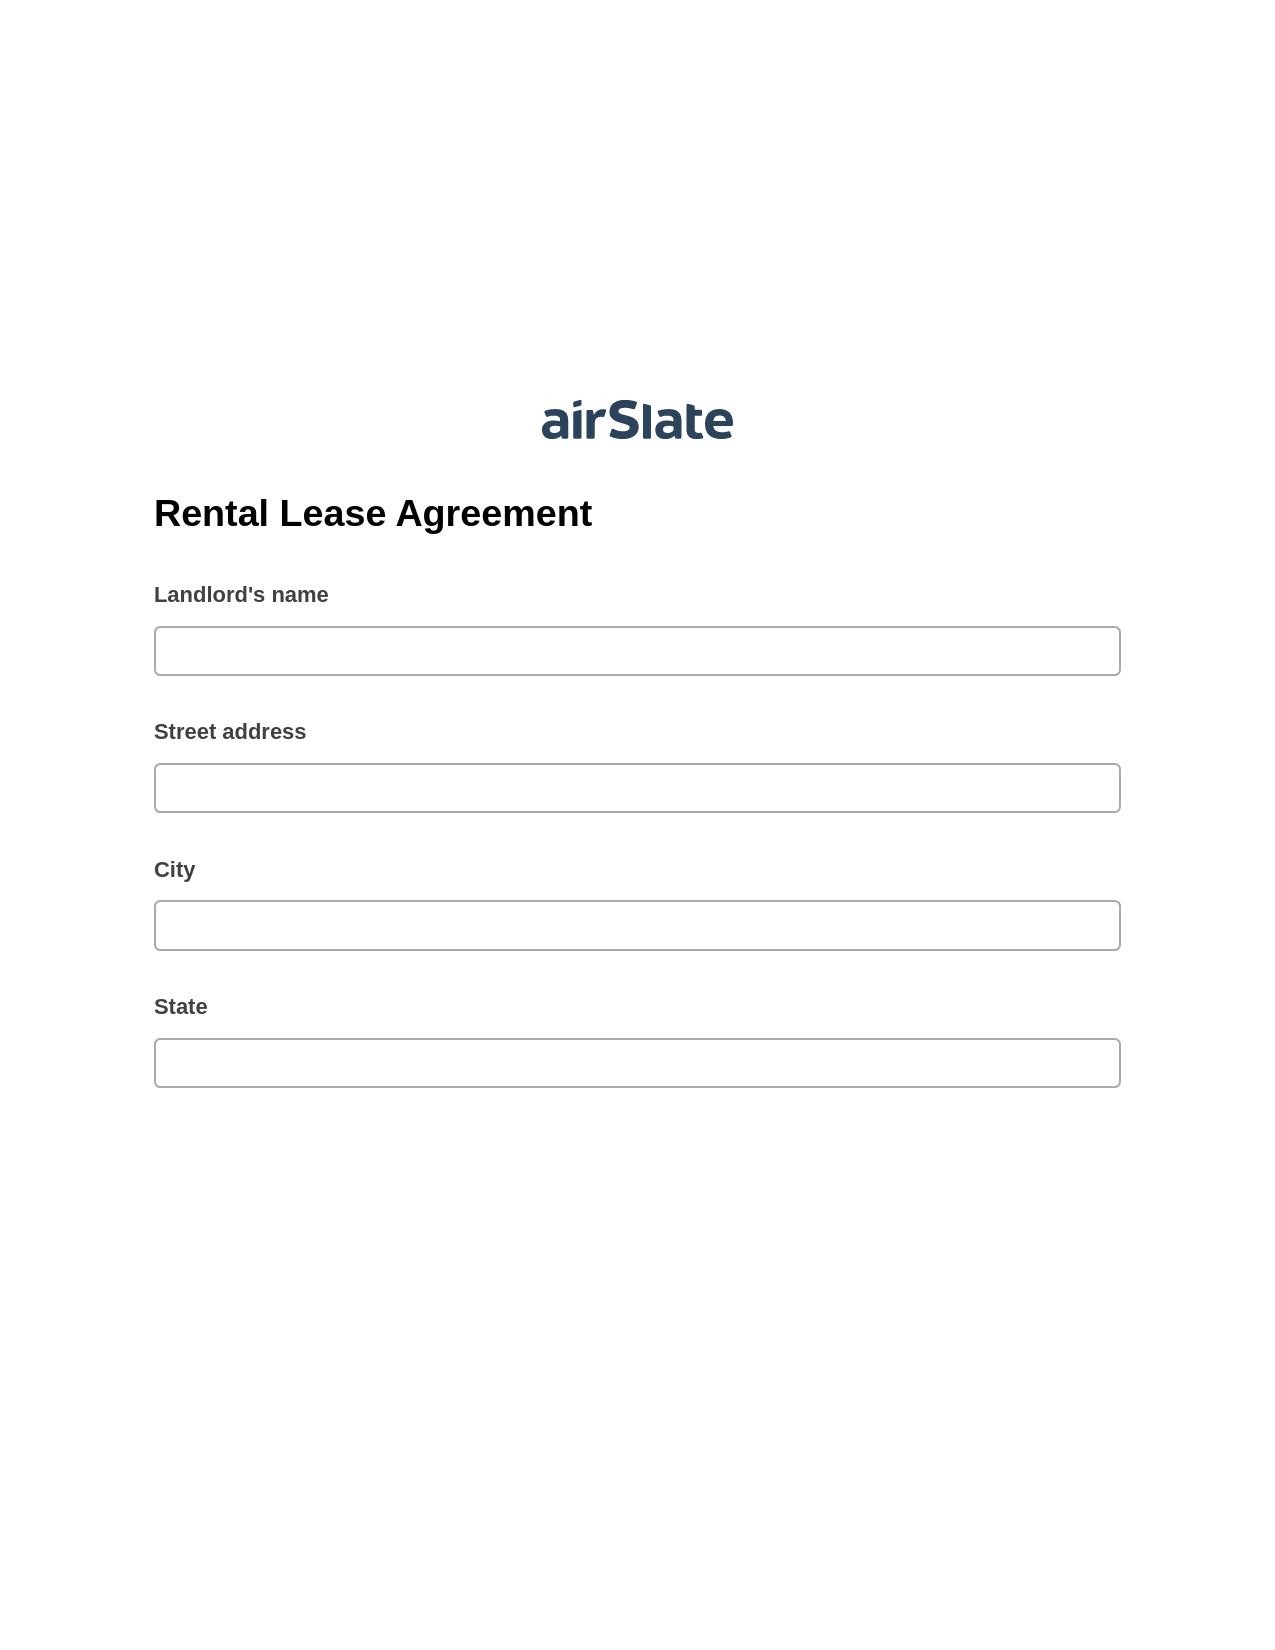 Rental Lease Agreement Pre-fill from Google Sheet Dropdown Options Bot, Open as Role Bot, Export to Smartsheet